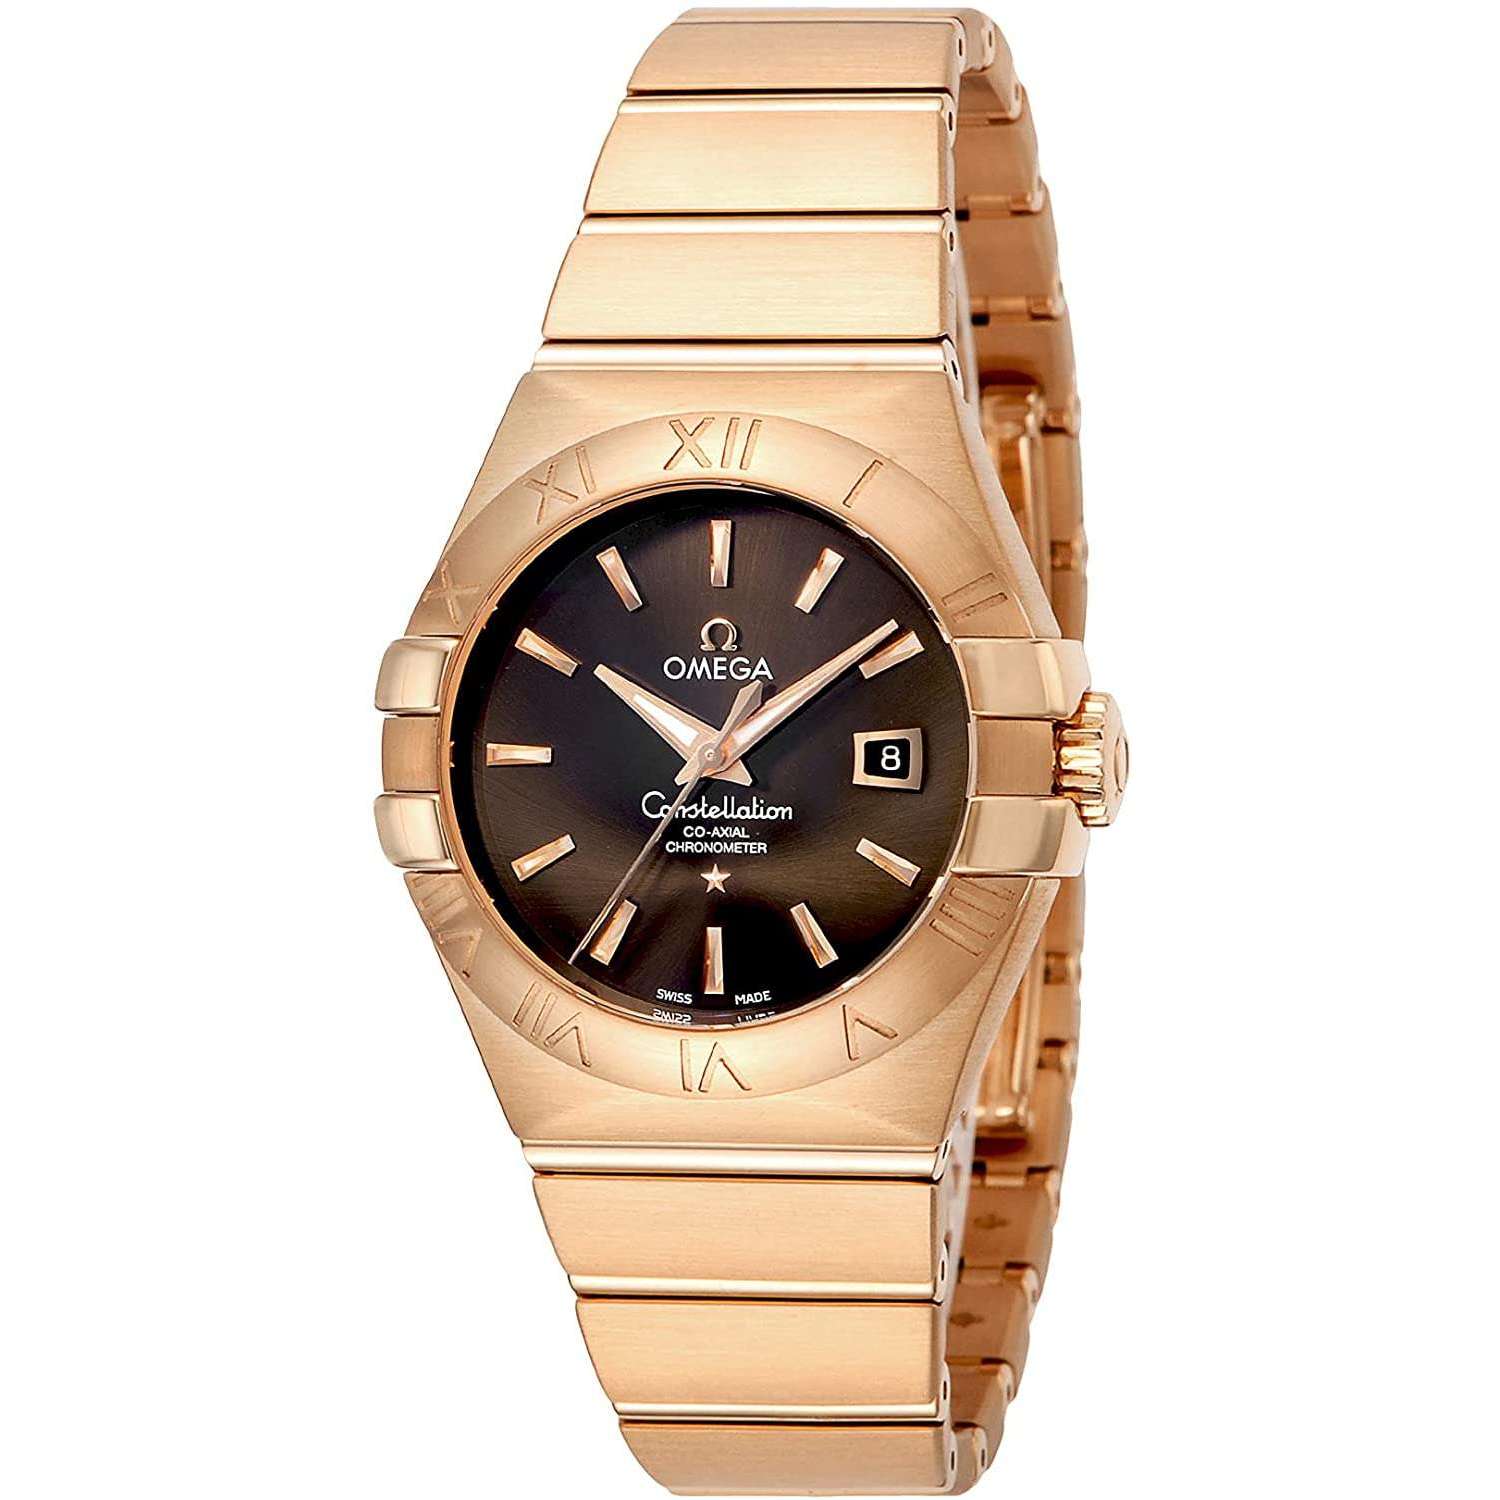 ROOK JAPAN:OMEGA CONSTELLATION CO-AXIAL CHRONOMETER 31 MM WOMEN WATCH 123.50.31.20.13.001,Luxury Watch,Omega